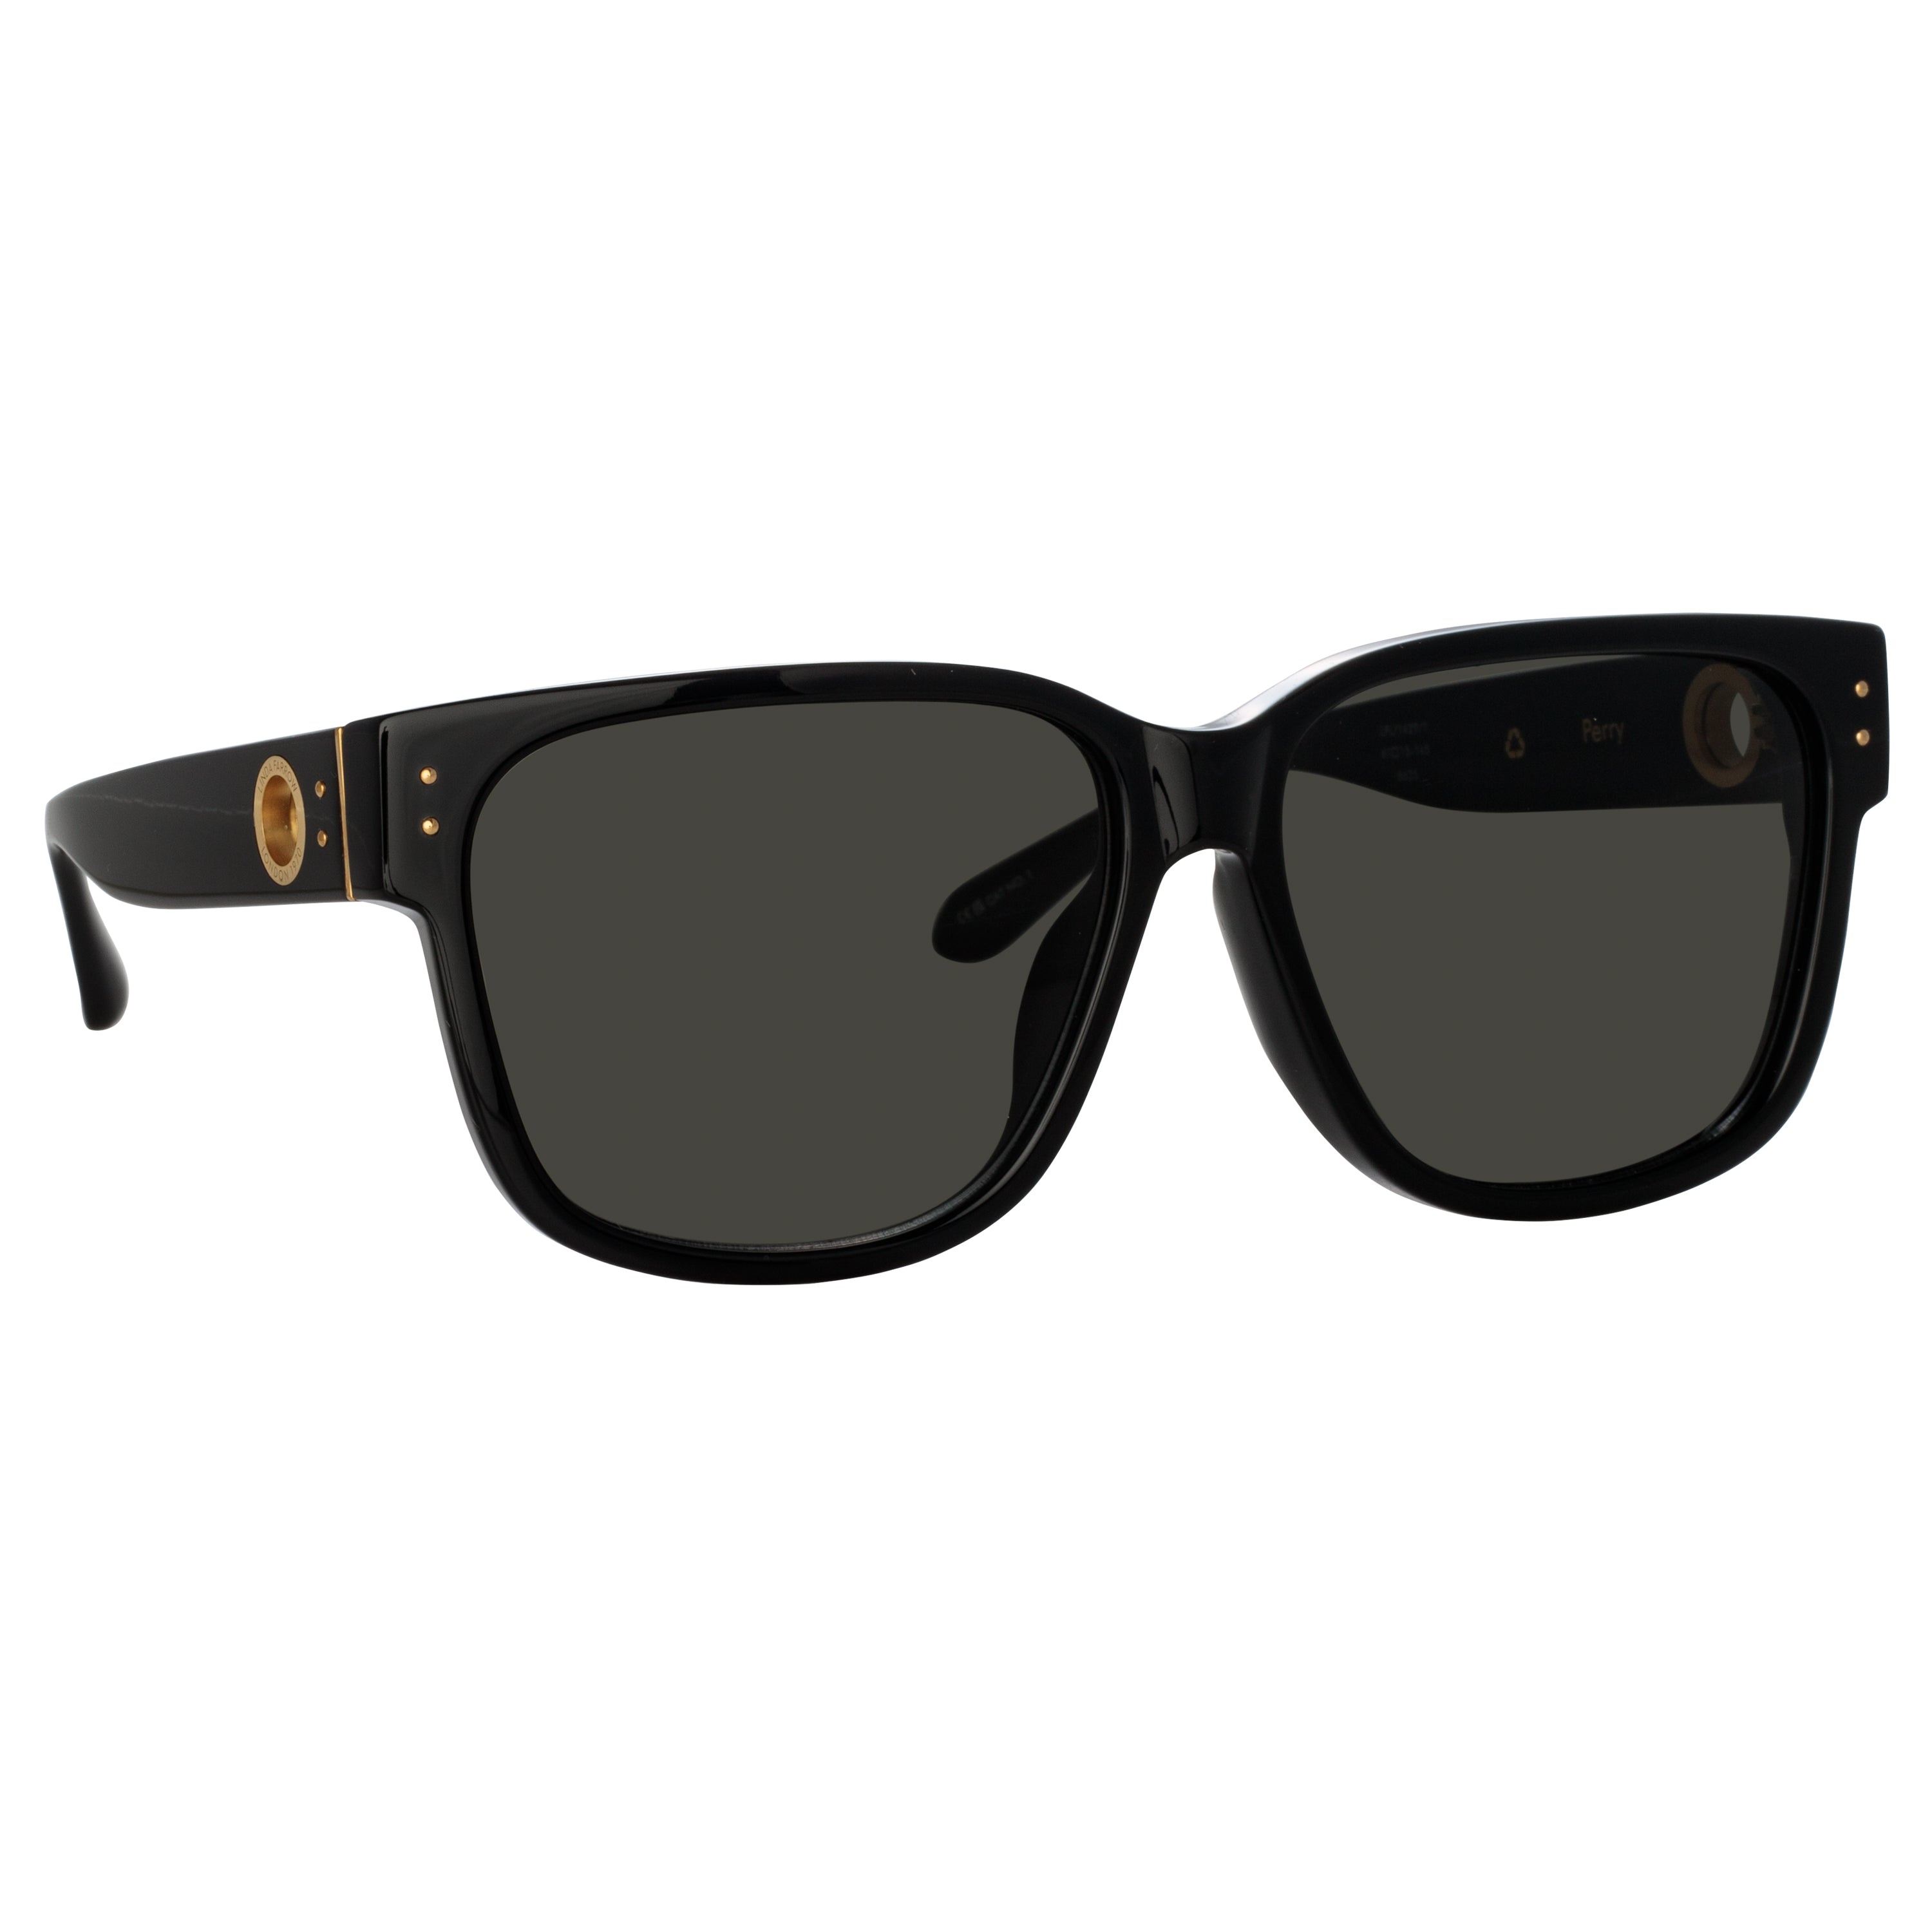 PERRY D-FRAME SUNGLASSES IN BLACK - 4